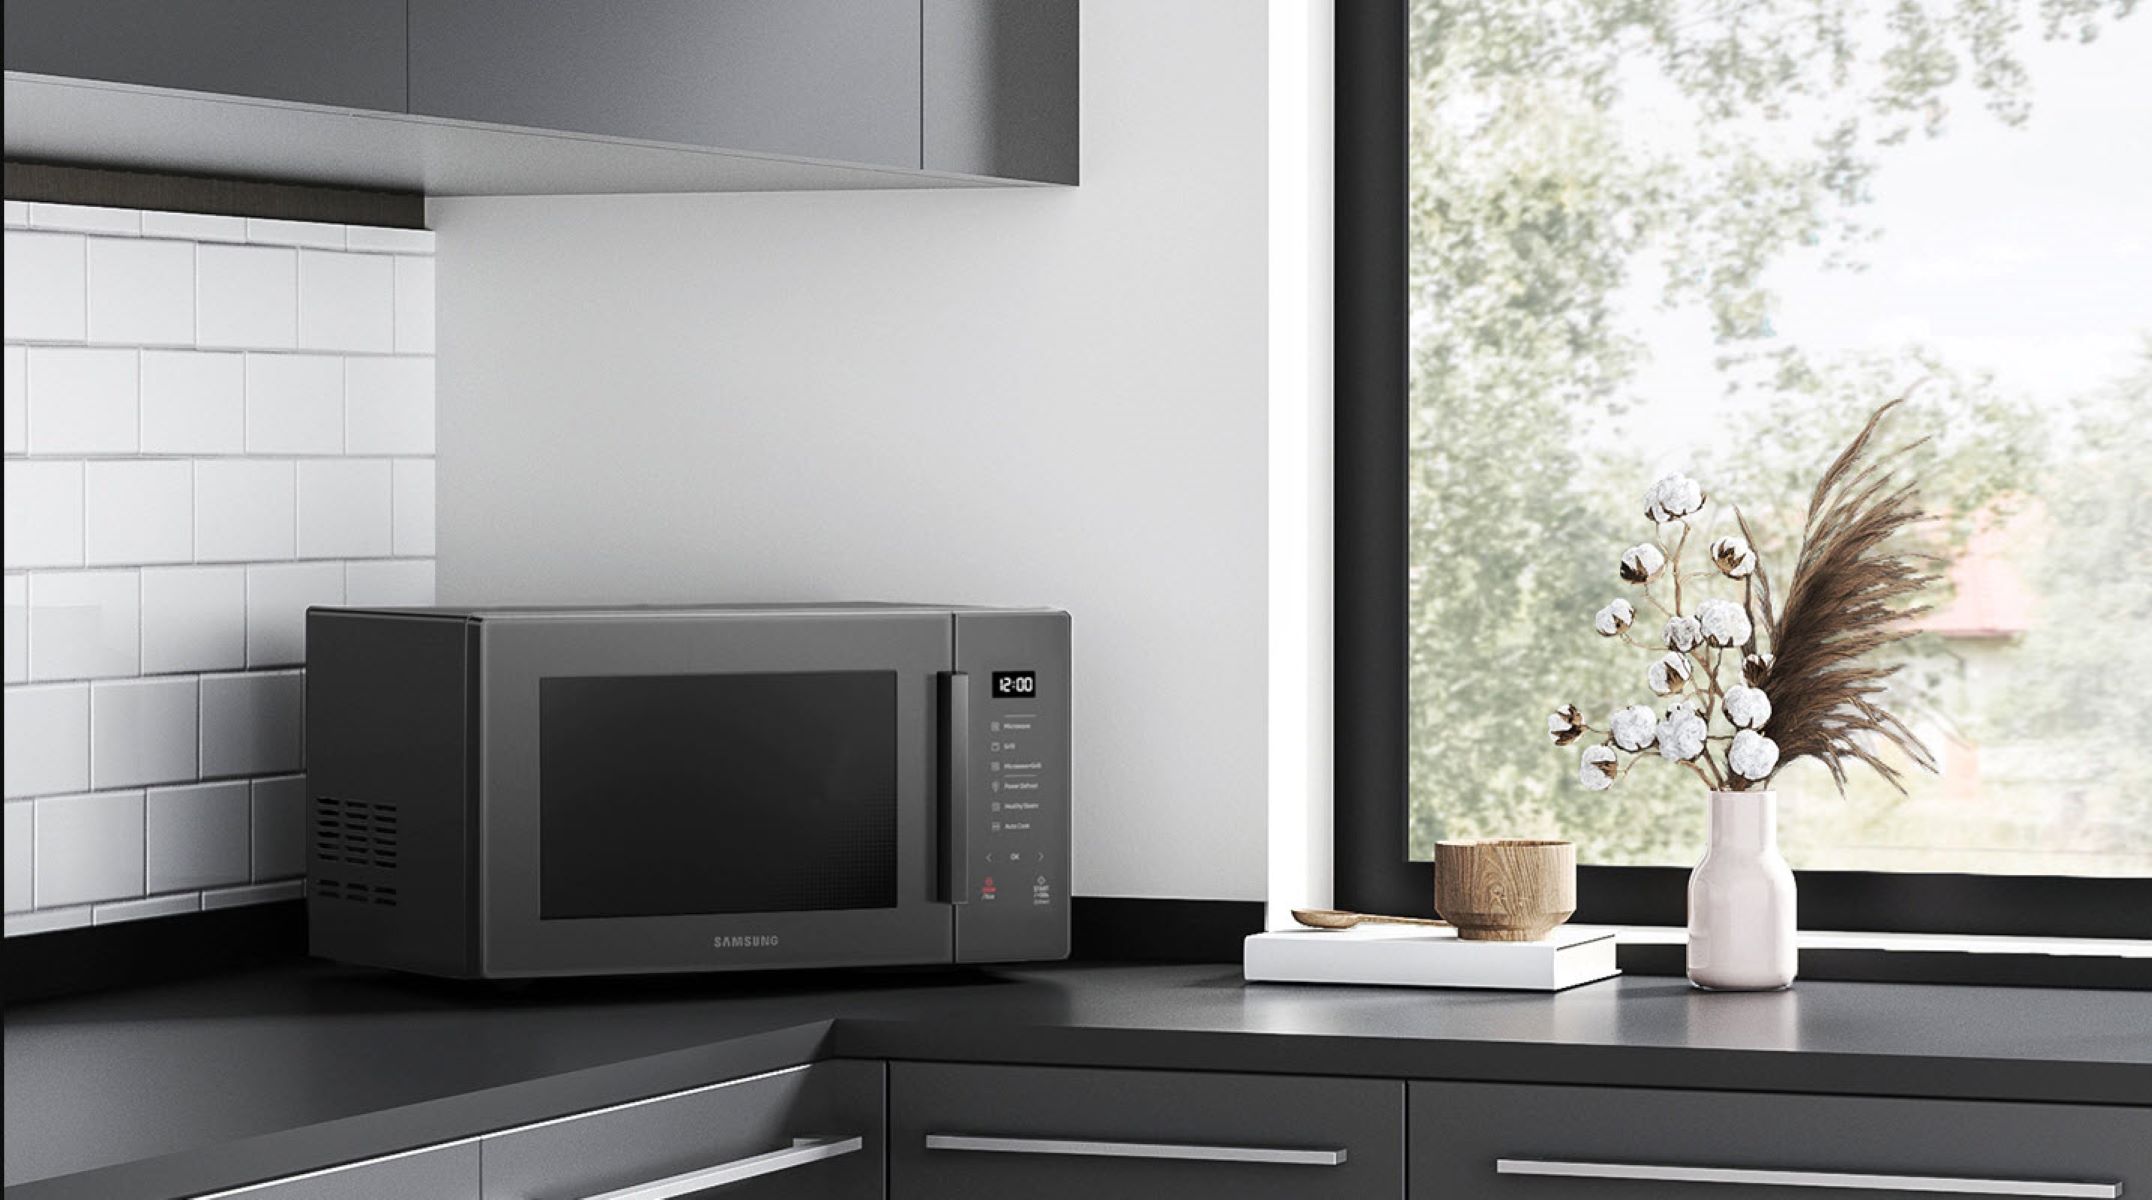 How To Fix The Error Code E-92 For Samsung Microwave